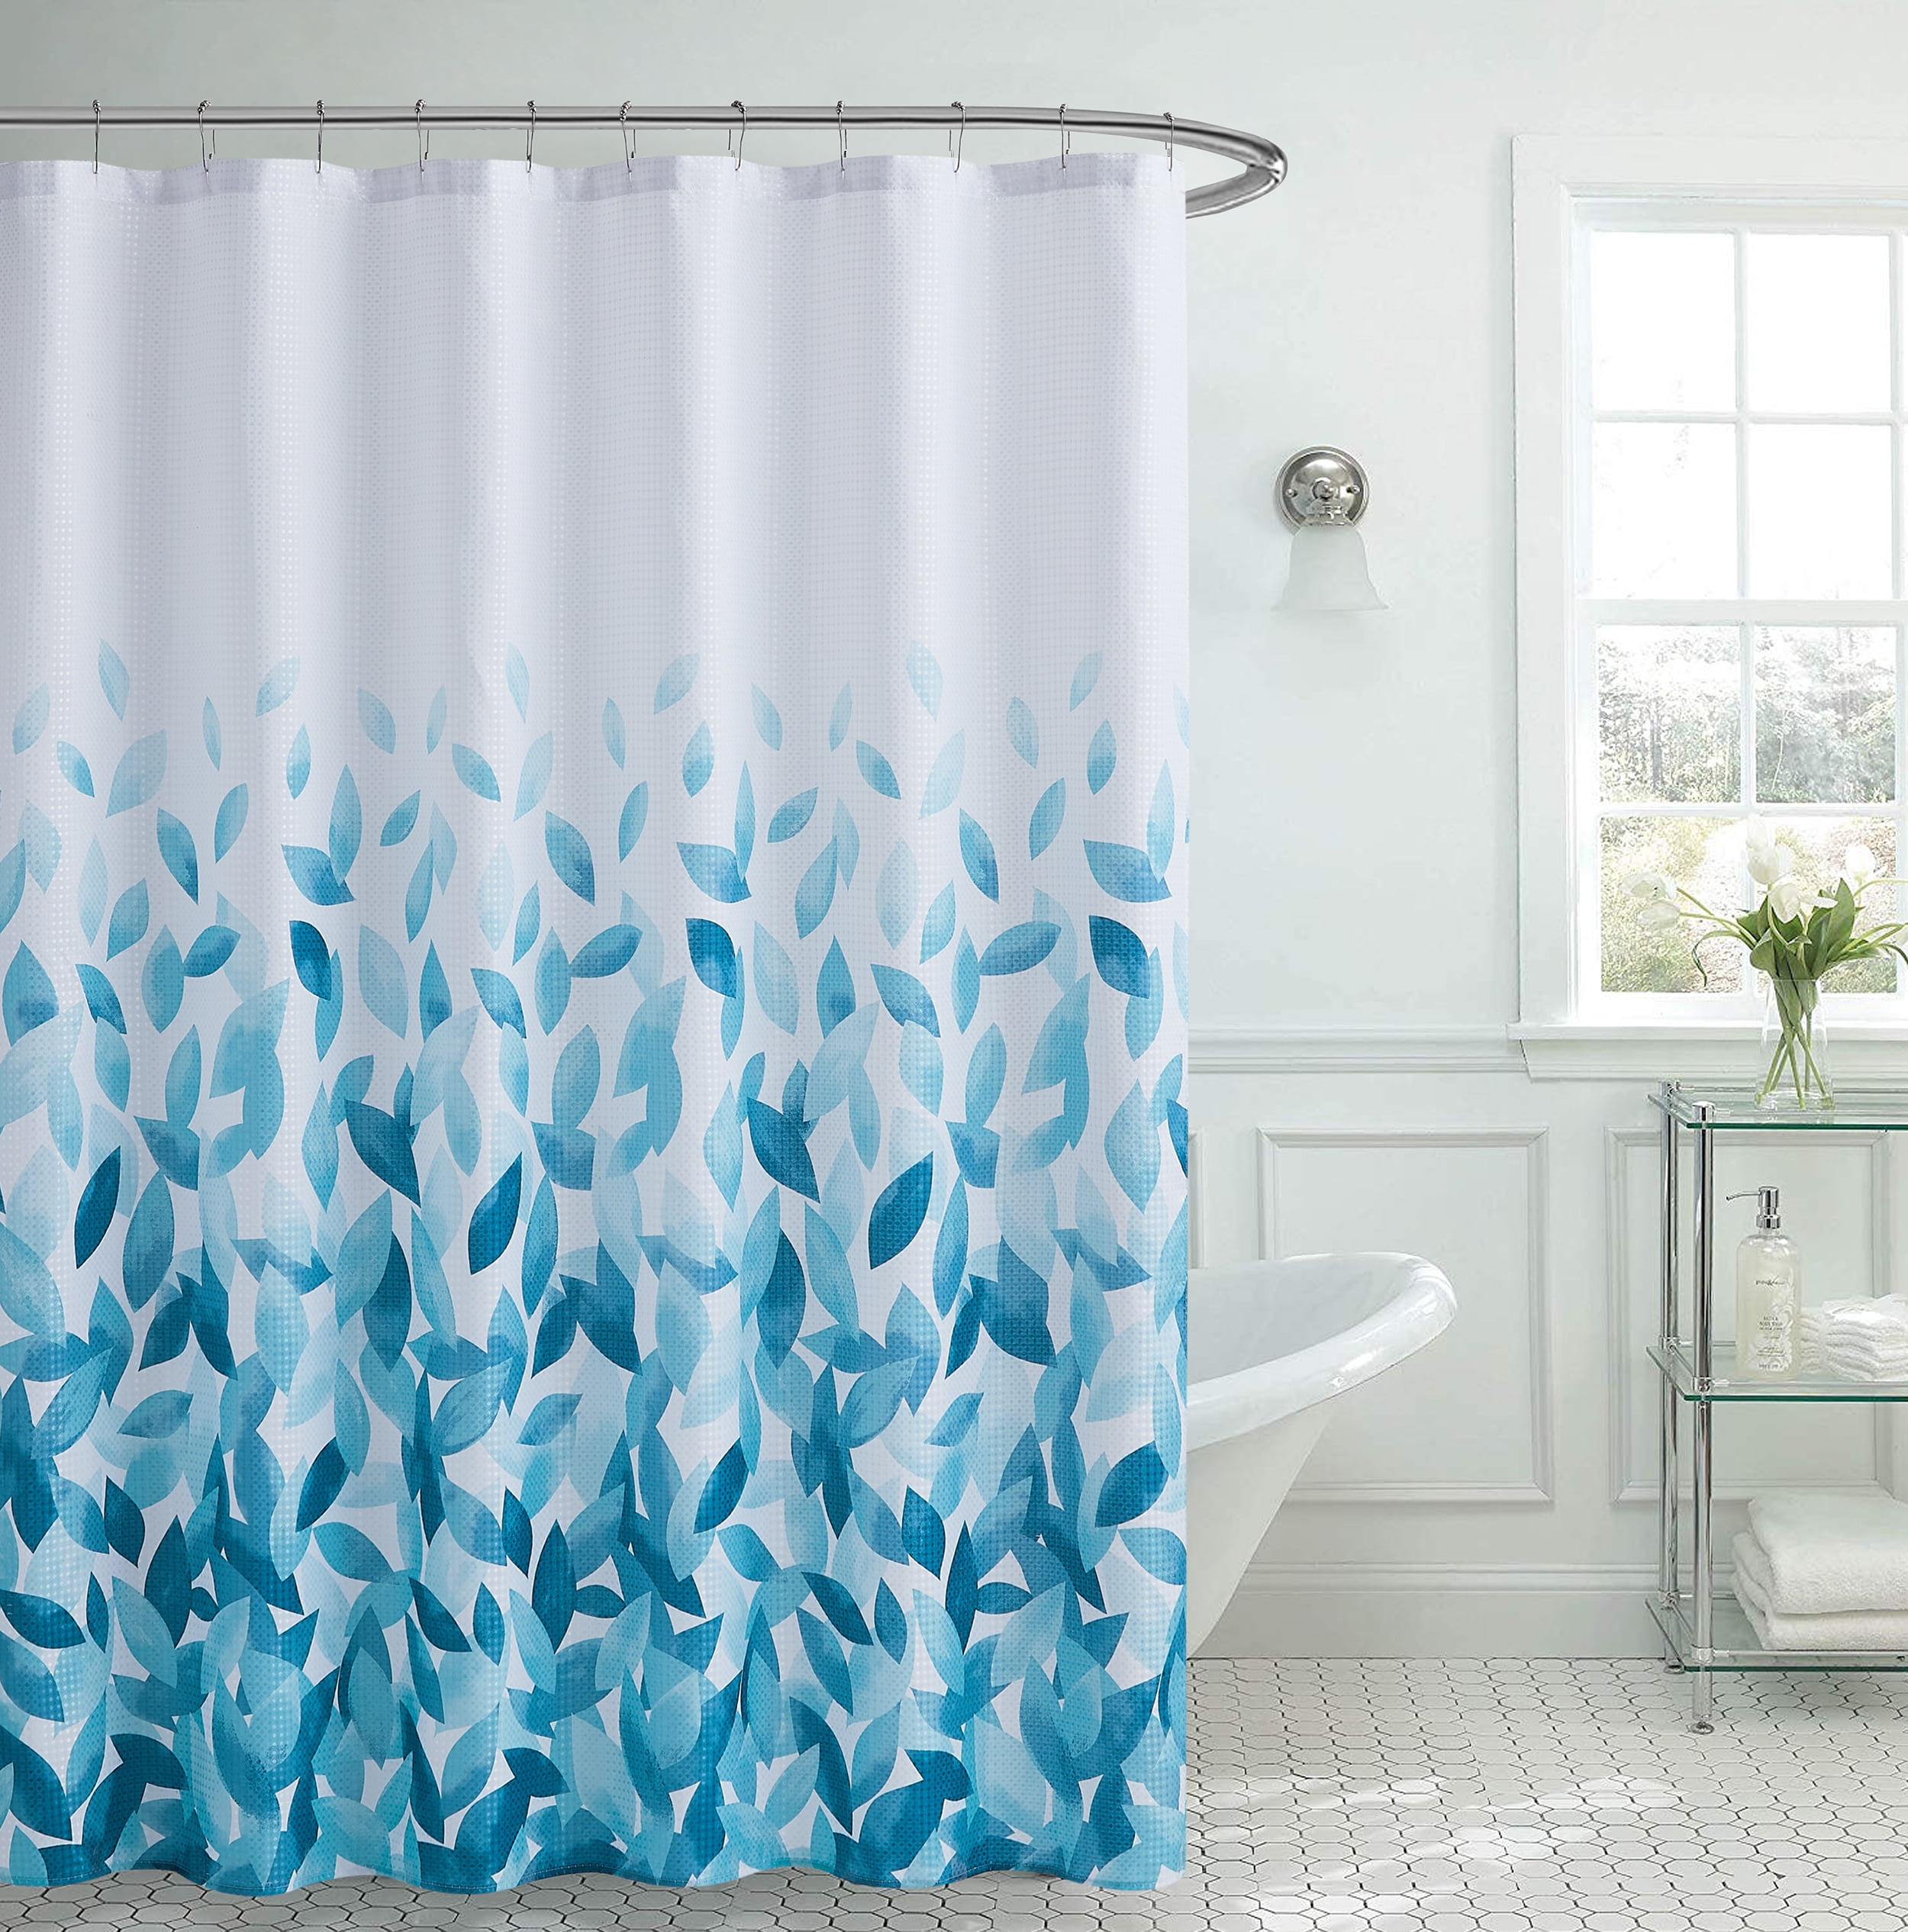 Machine Washable Cactus Fabric Shower Curtain- Easy Care Fabric Shower Curtain with Reinforced Buttonholes for Bathroom Showers 70 x 70 Stalls and Bathtubs